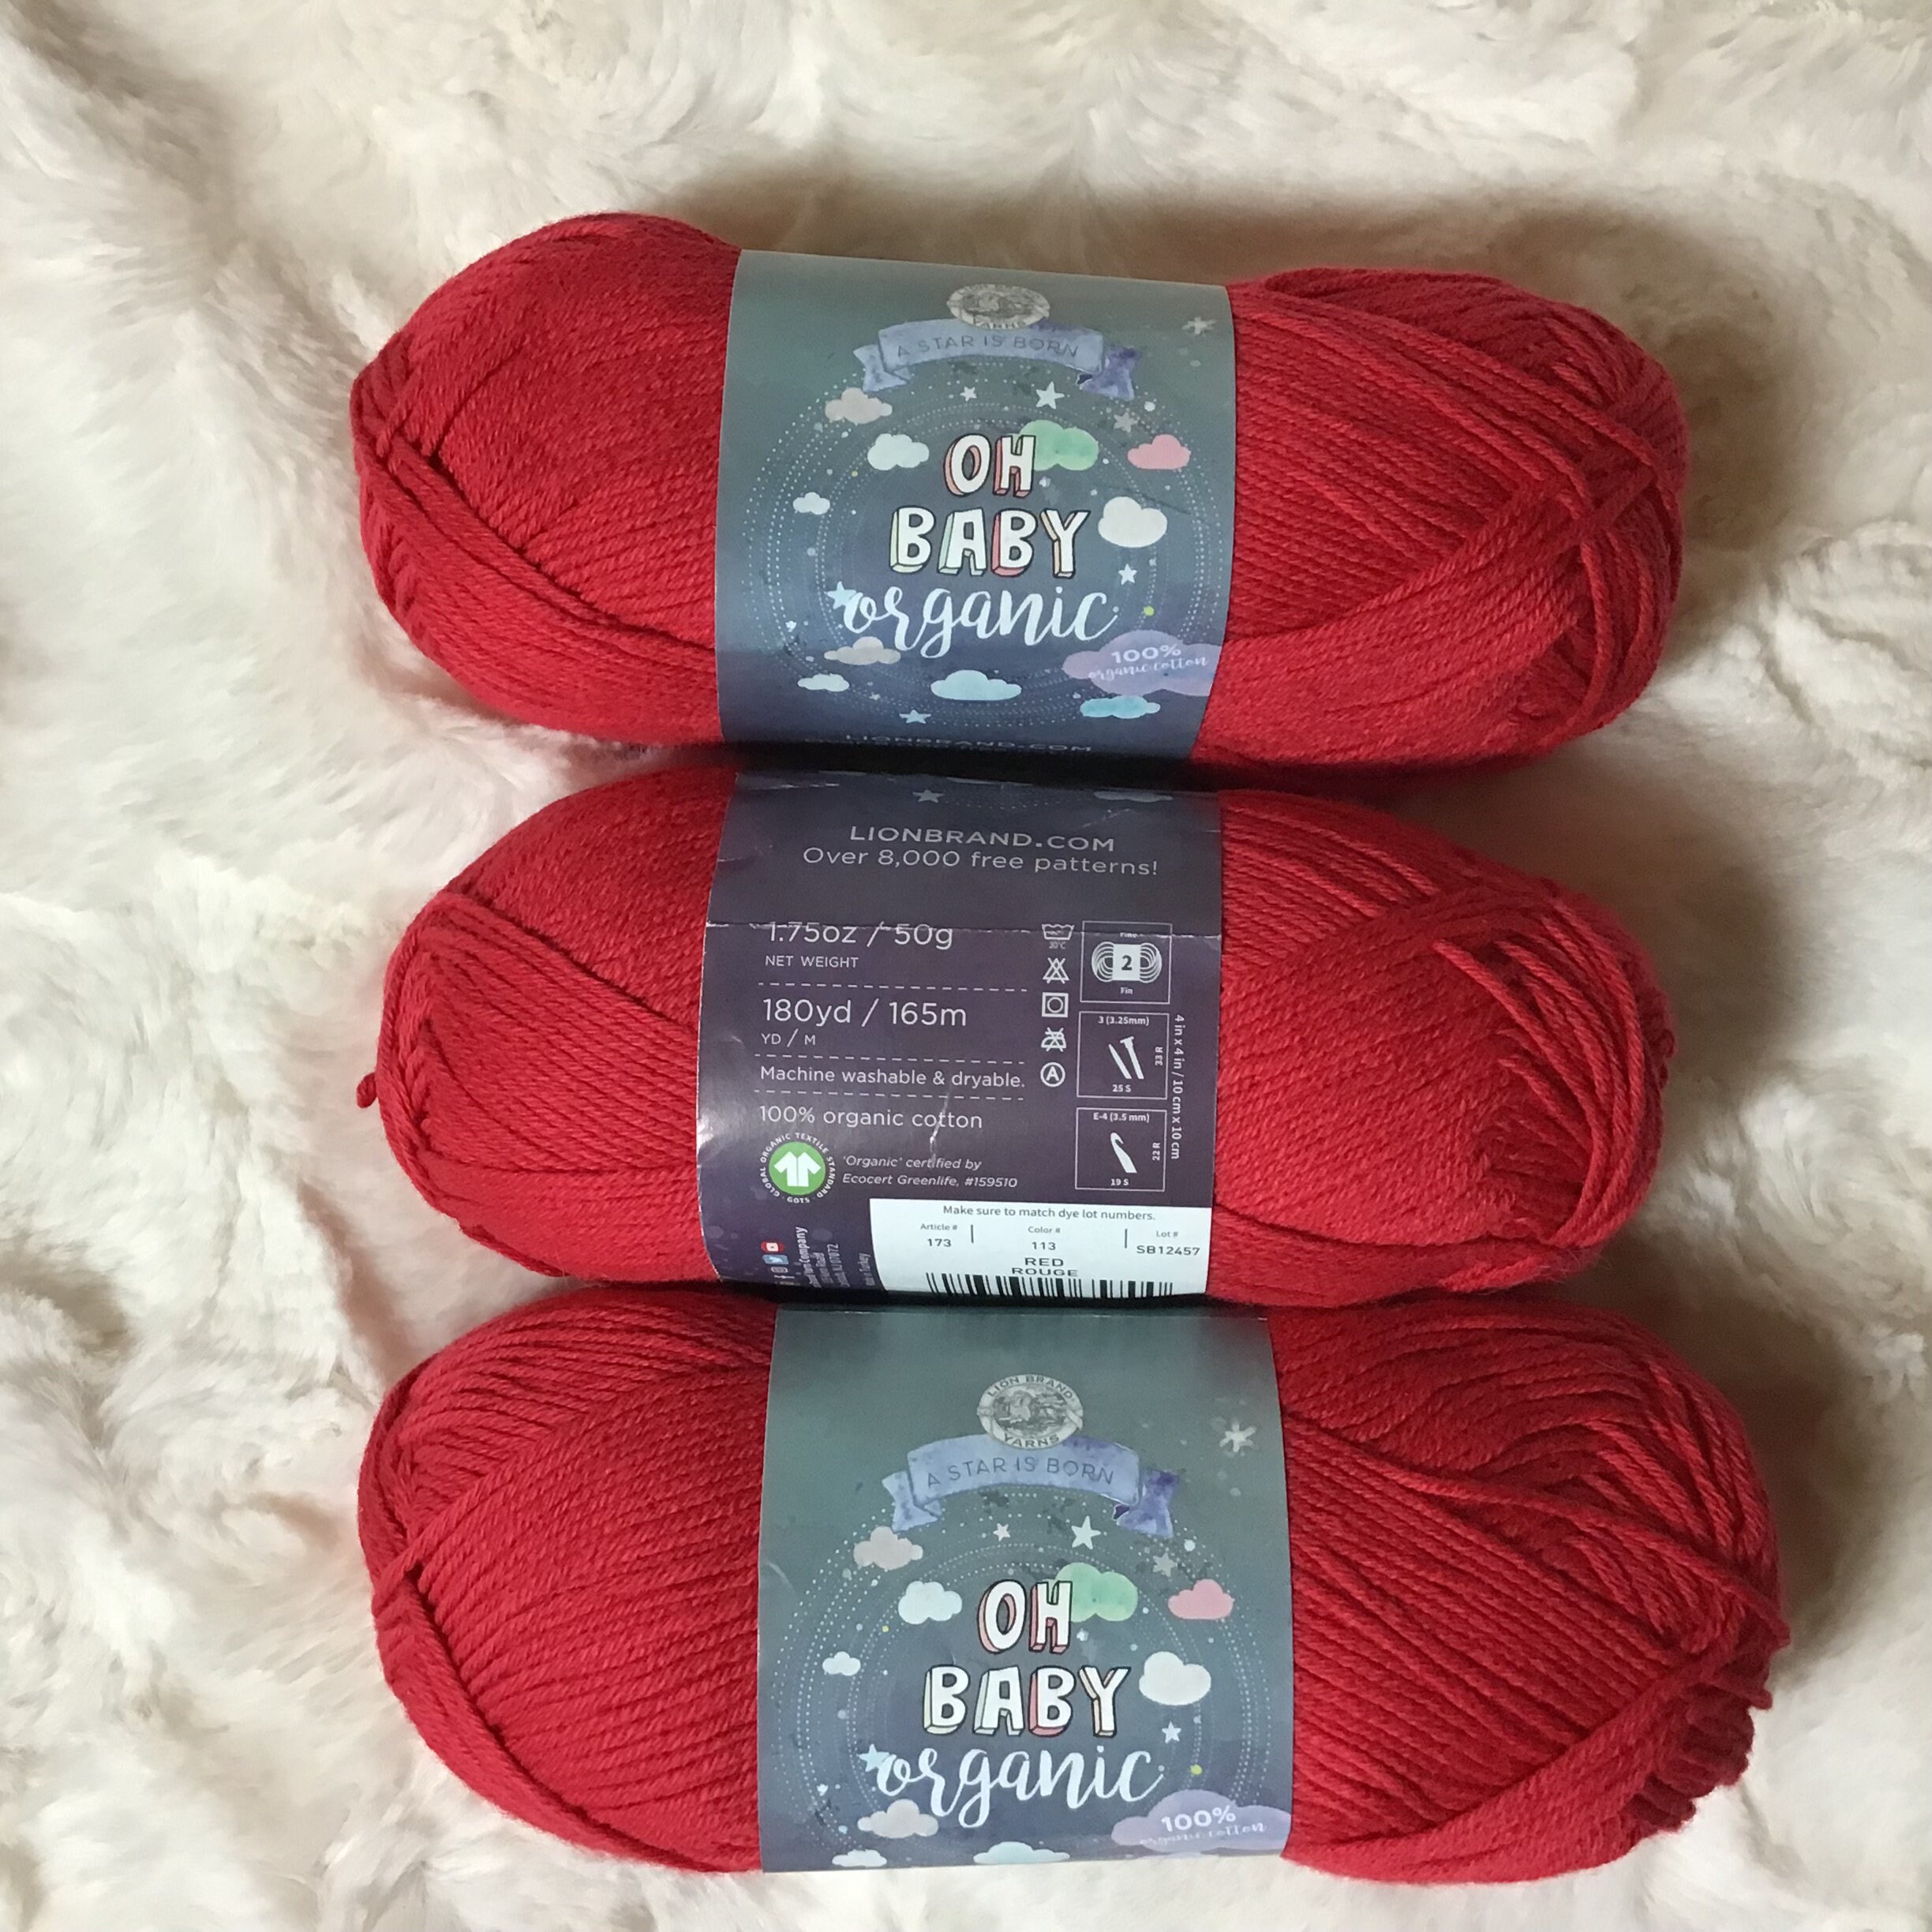 Lion Brand Yarn Oh Baby Red Natrual Fiber Fine Cotton Red Yarn 3 Pack 